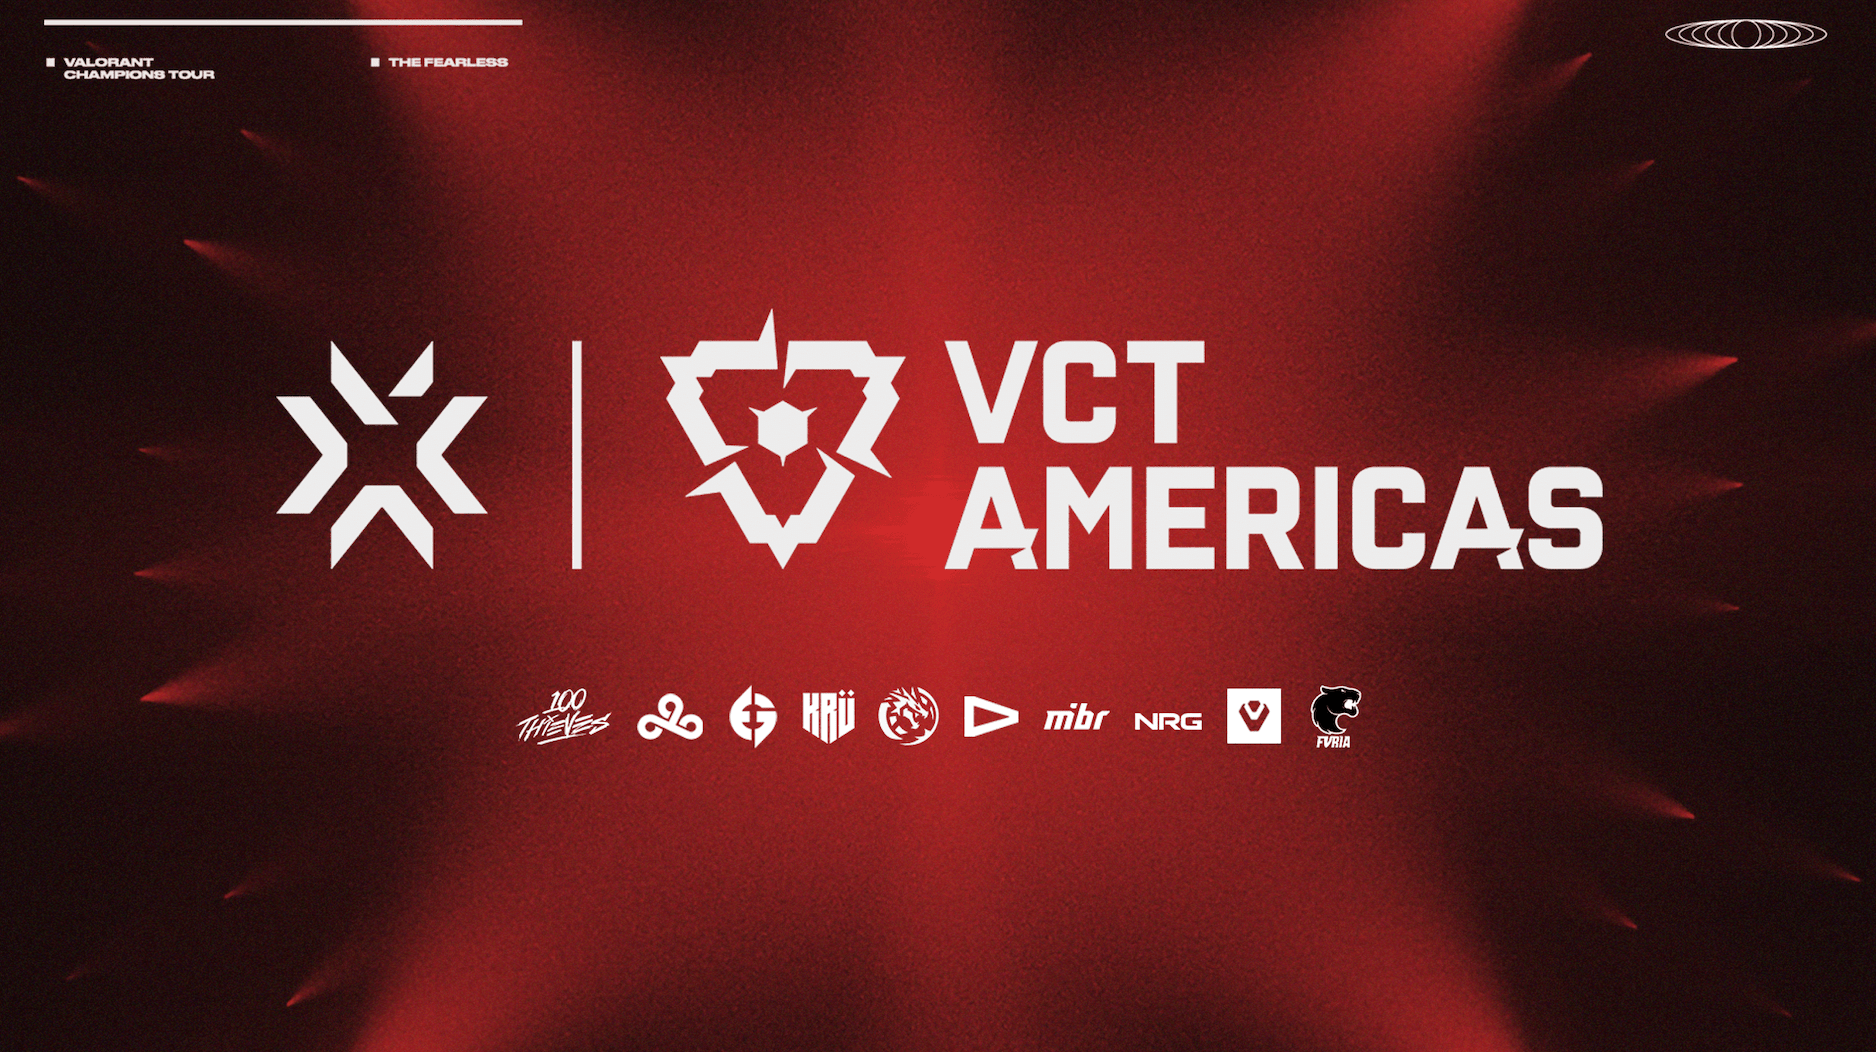 VCT Americas League debut records over 400,000 viewers